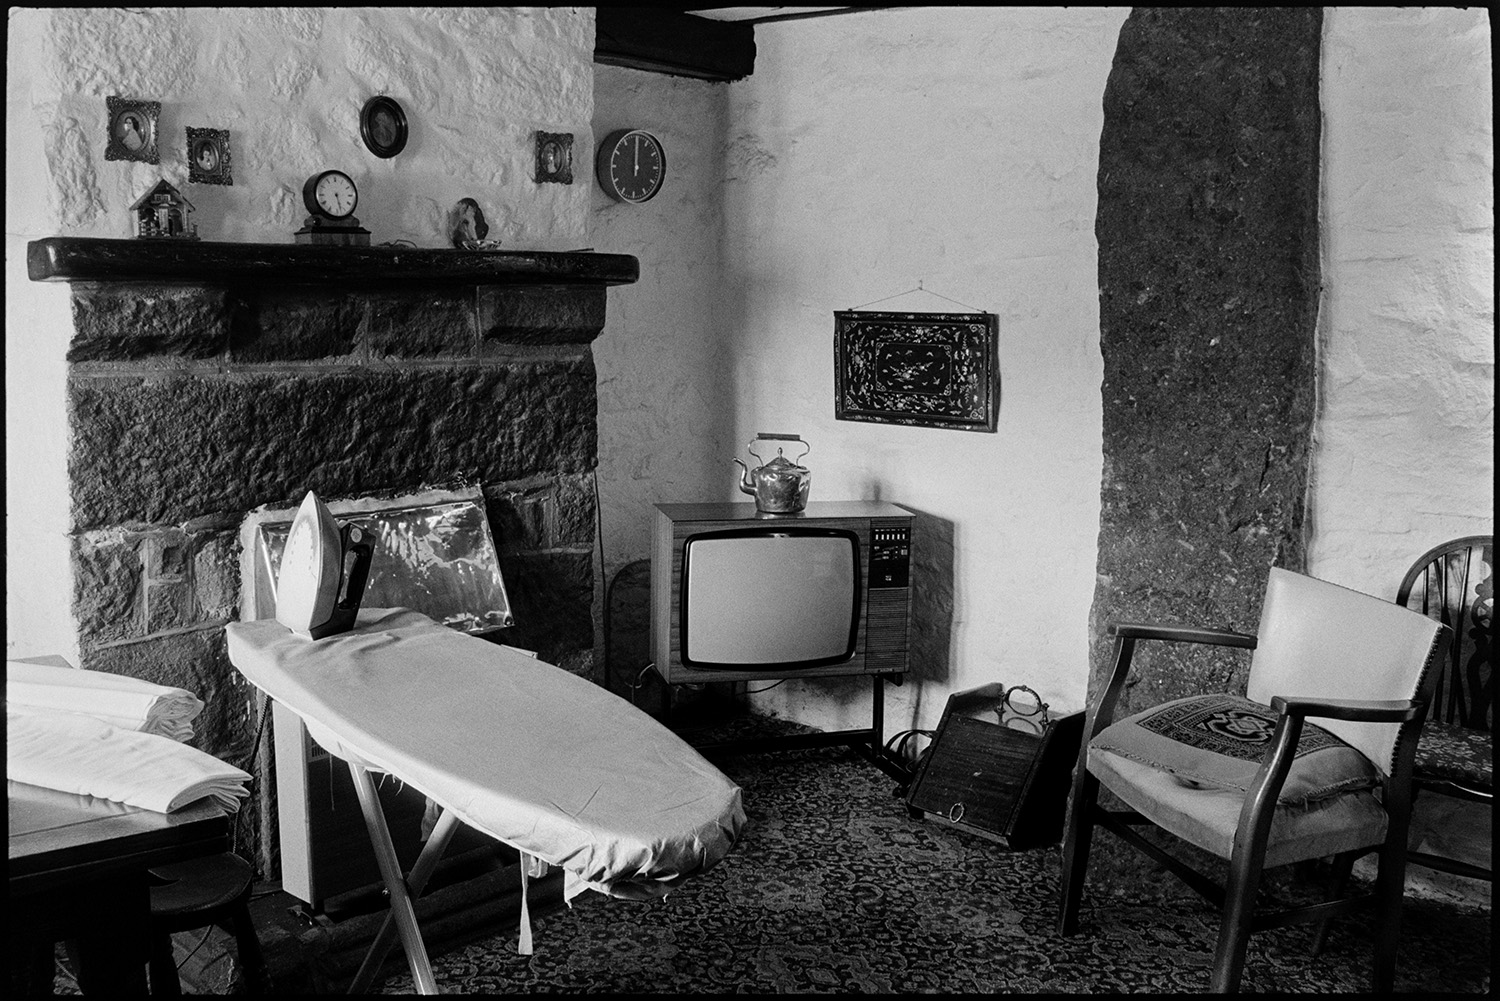 Woman ironing in pub sitting room with television, fireplace. Pub bar.
[A corner of the bar area at the Kings Arms, South Zeal with fireplace, ironing board, chair and television.]